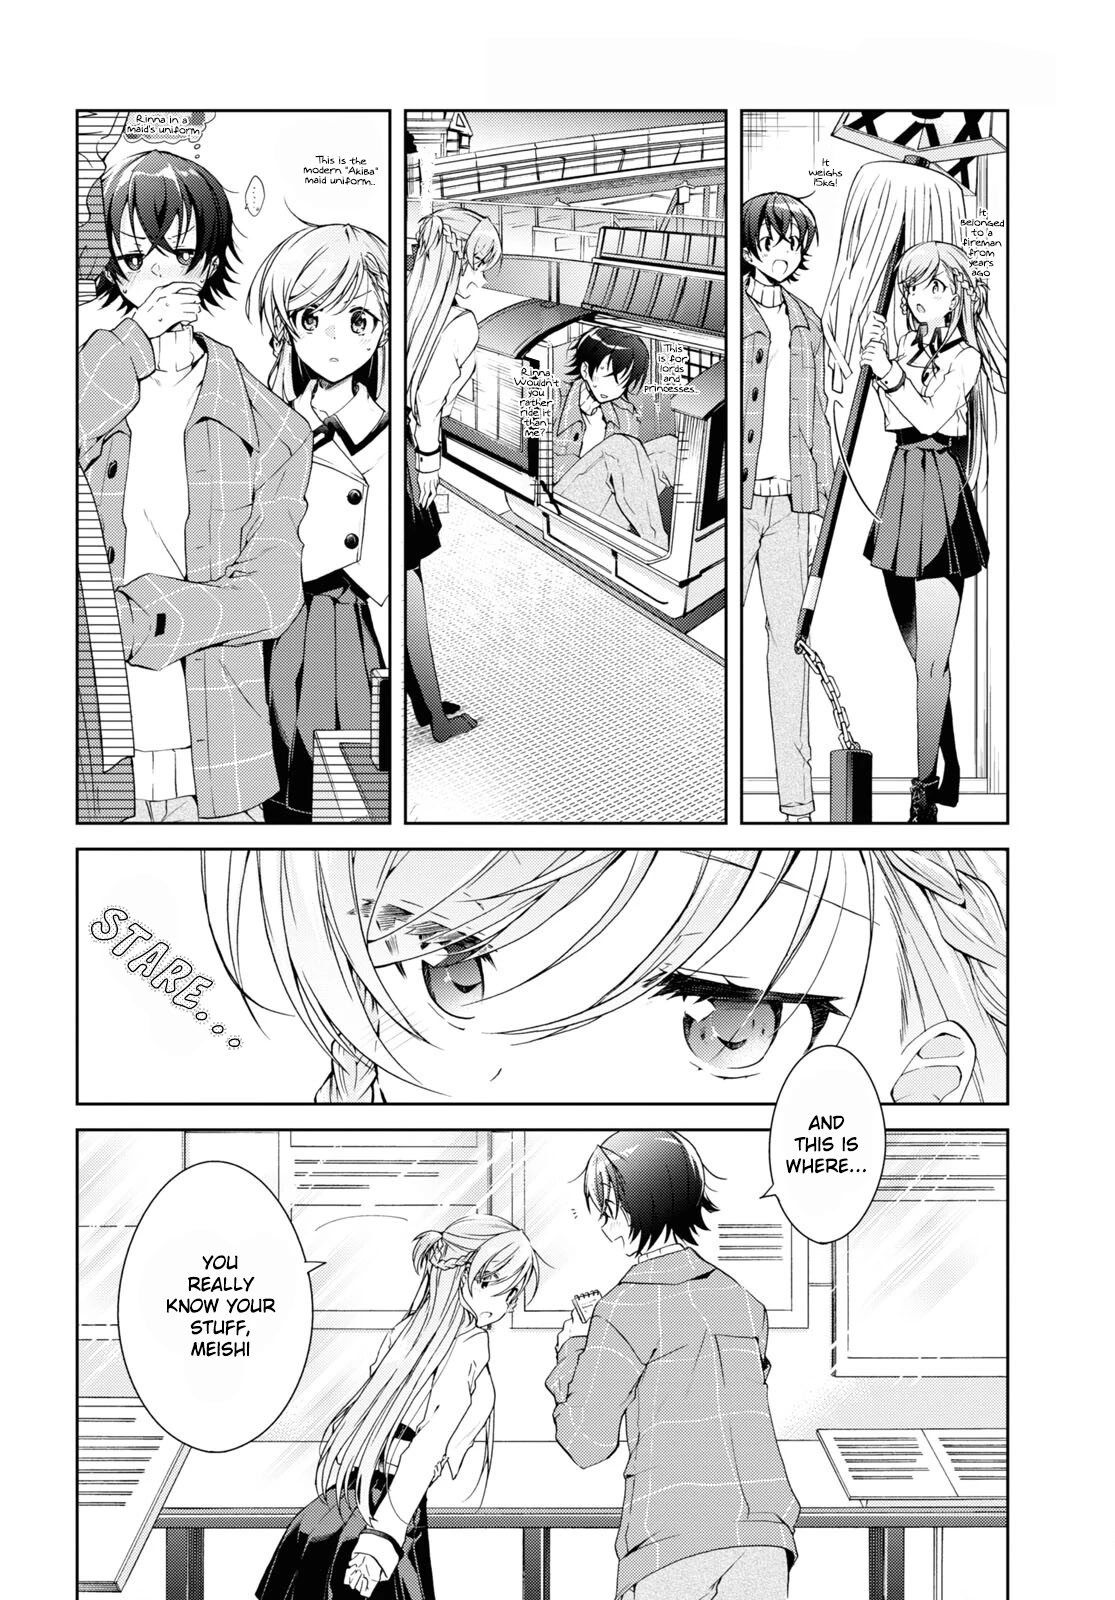 Isshiki-san Wants to Know About Love. - chapter 16 - #6